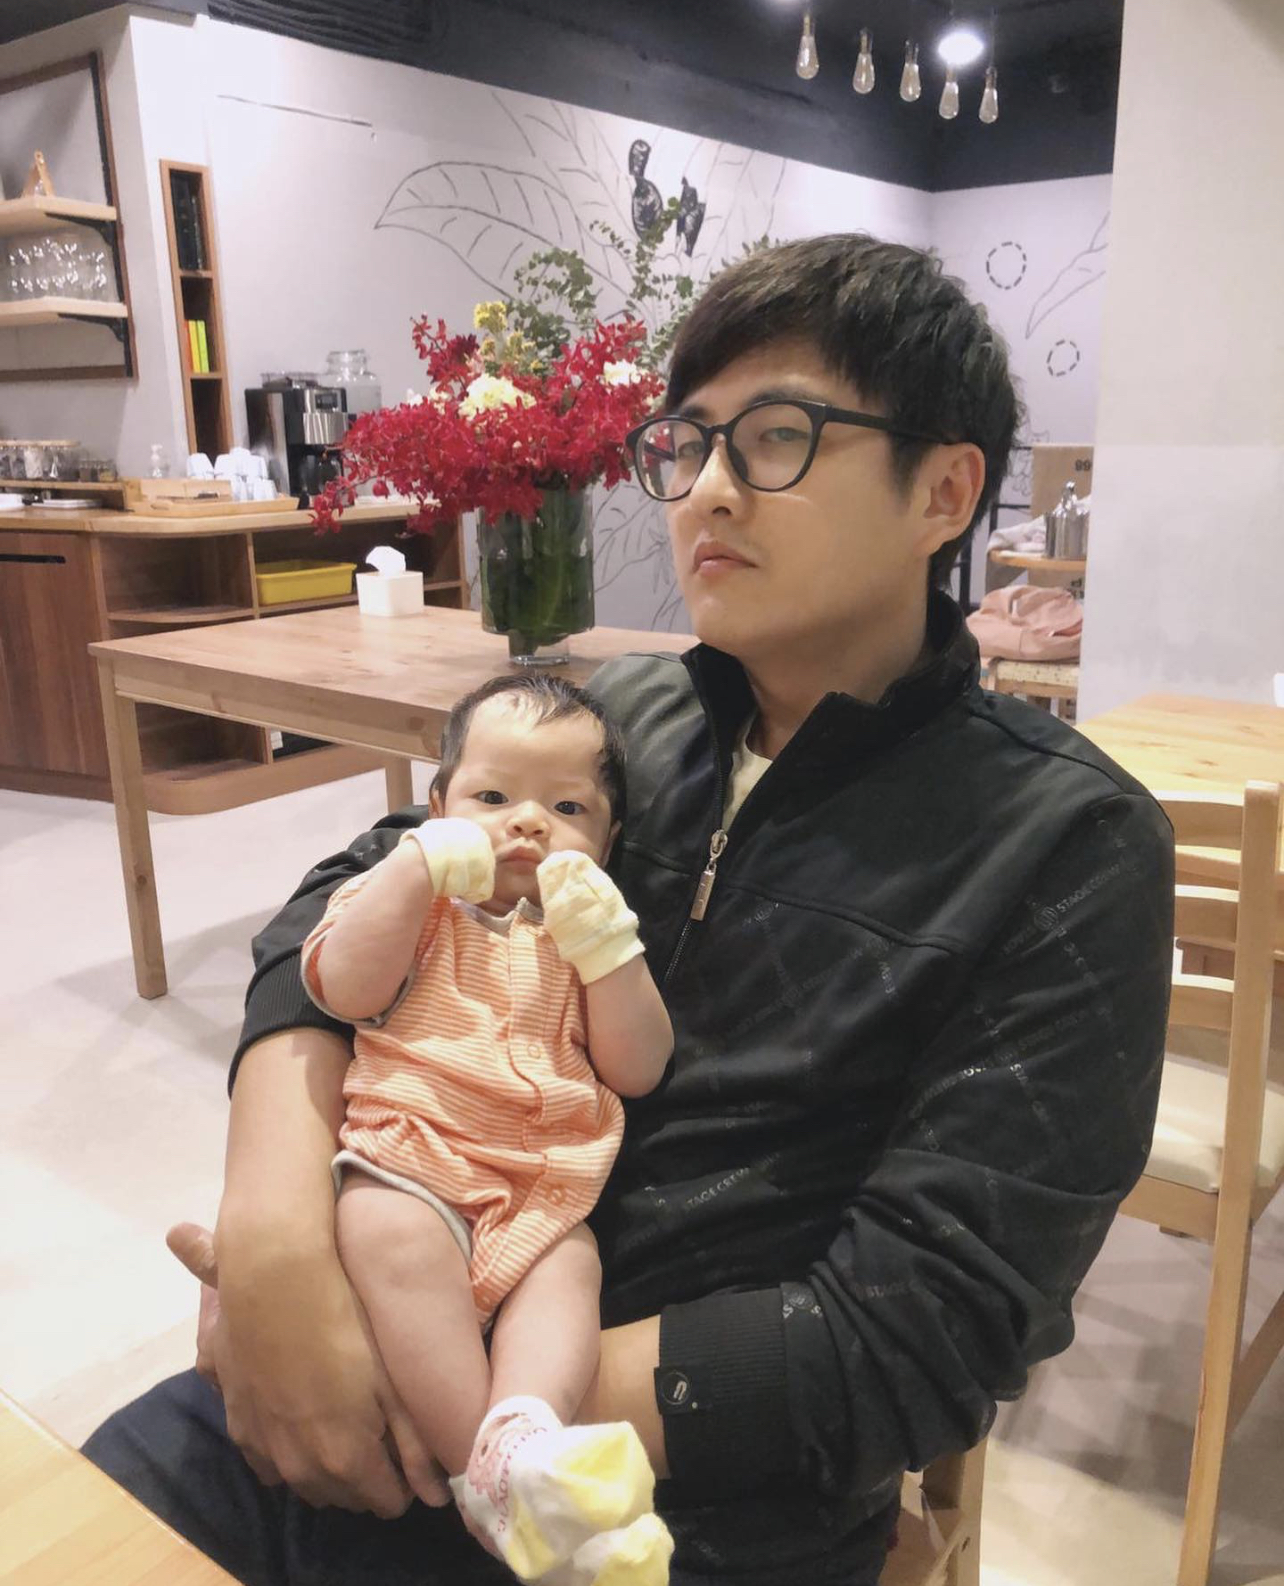 Huang Jinglun Wondered “Whose Child Is This?” When He First Looked At His Newborn Son